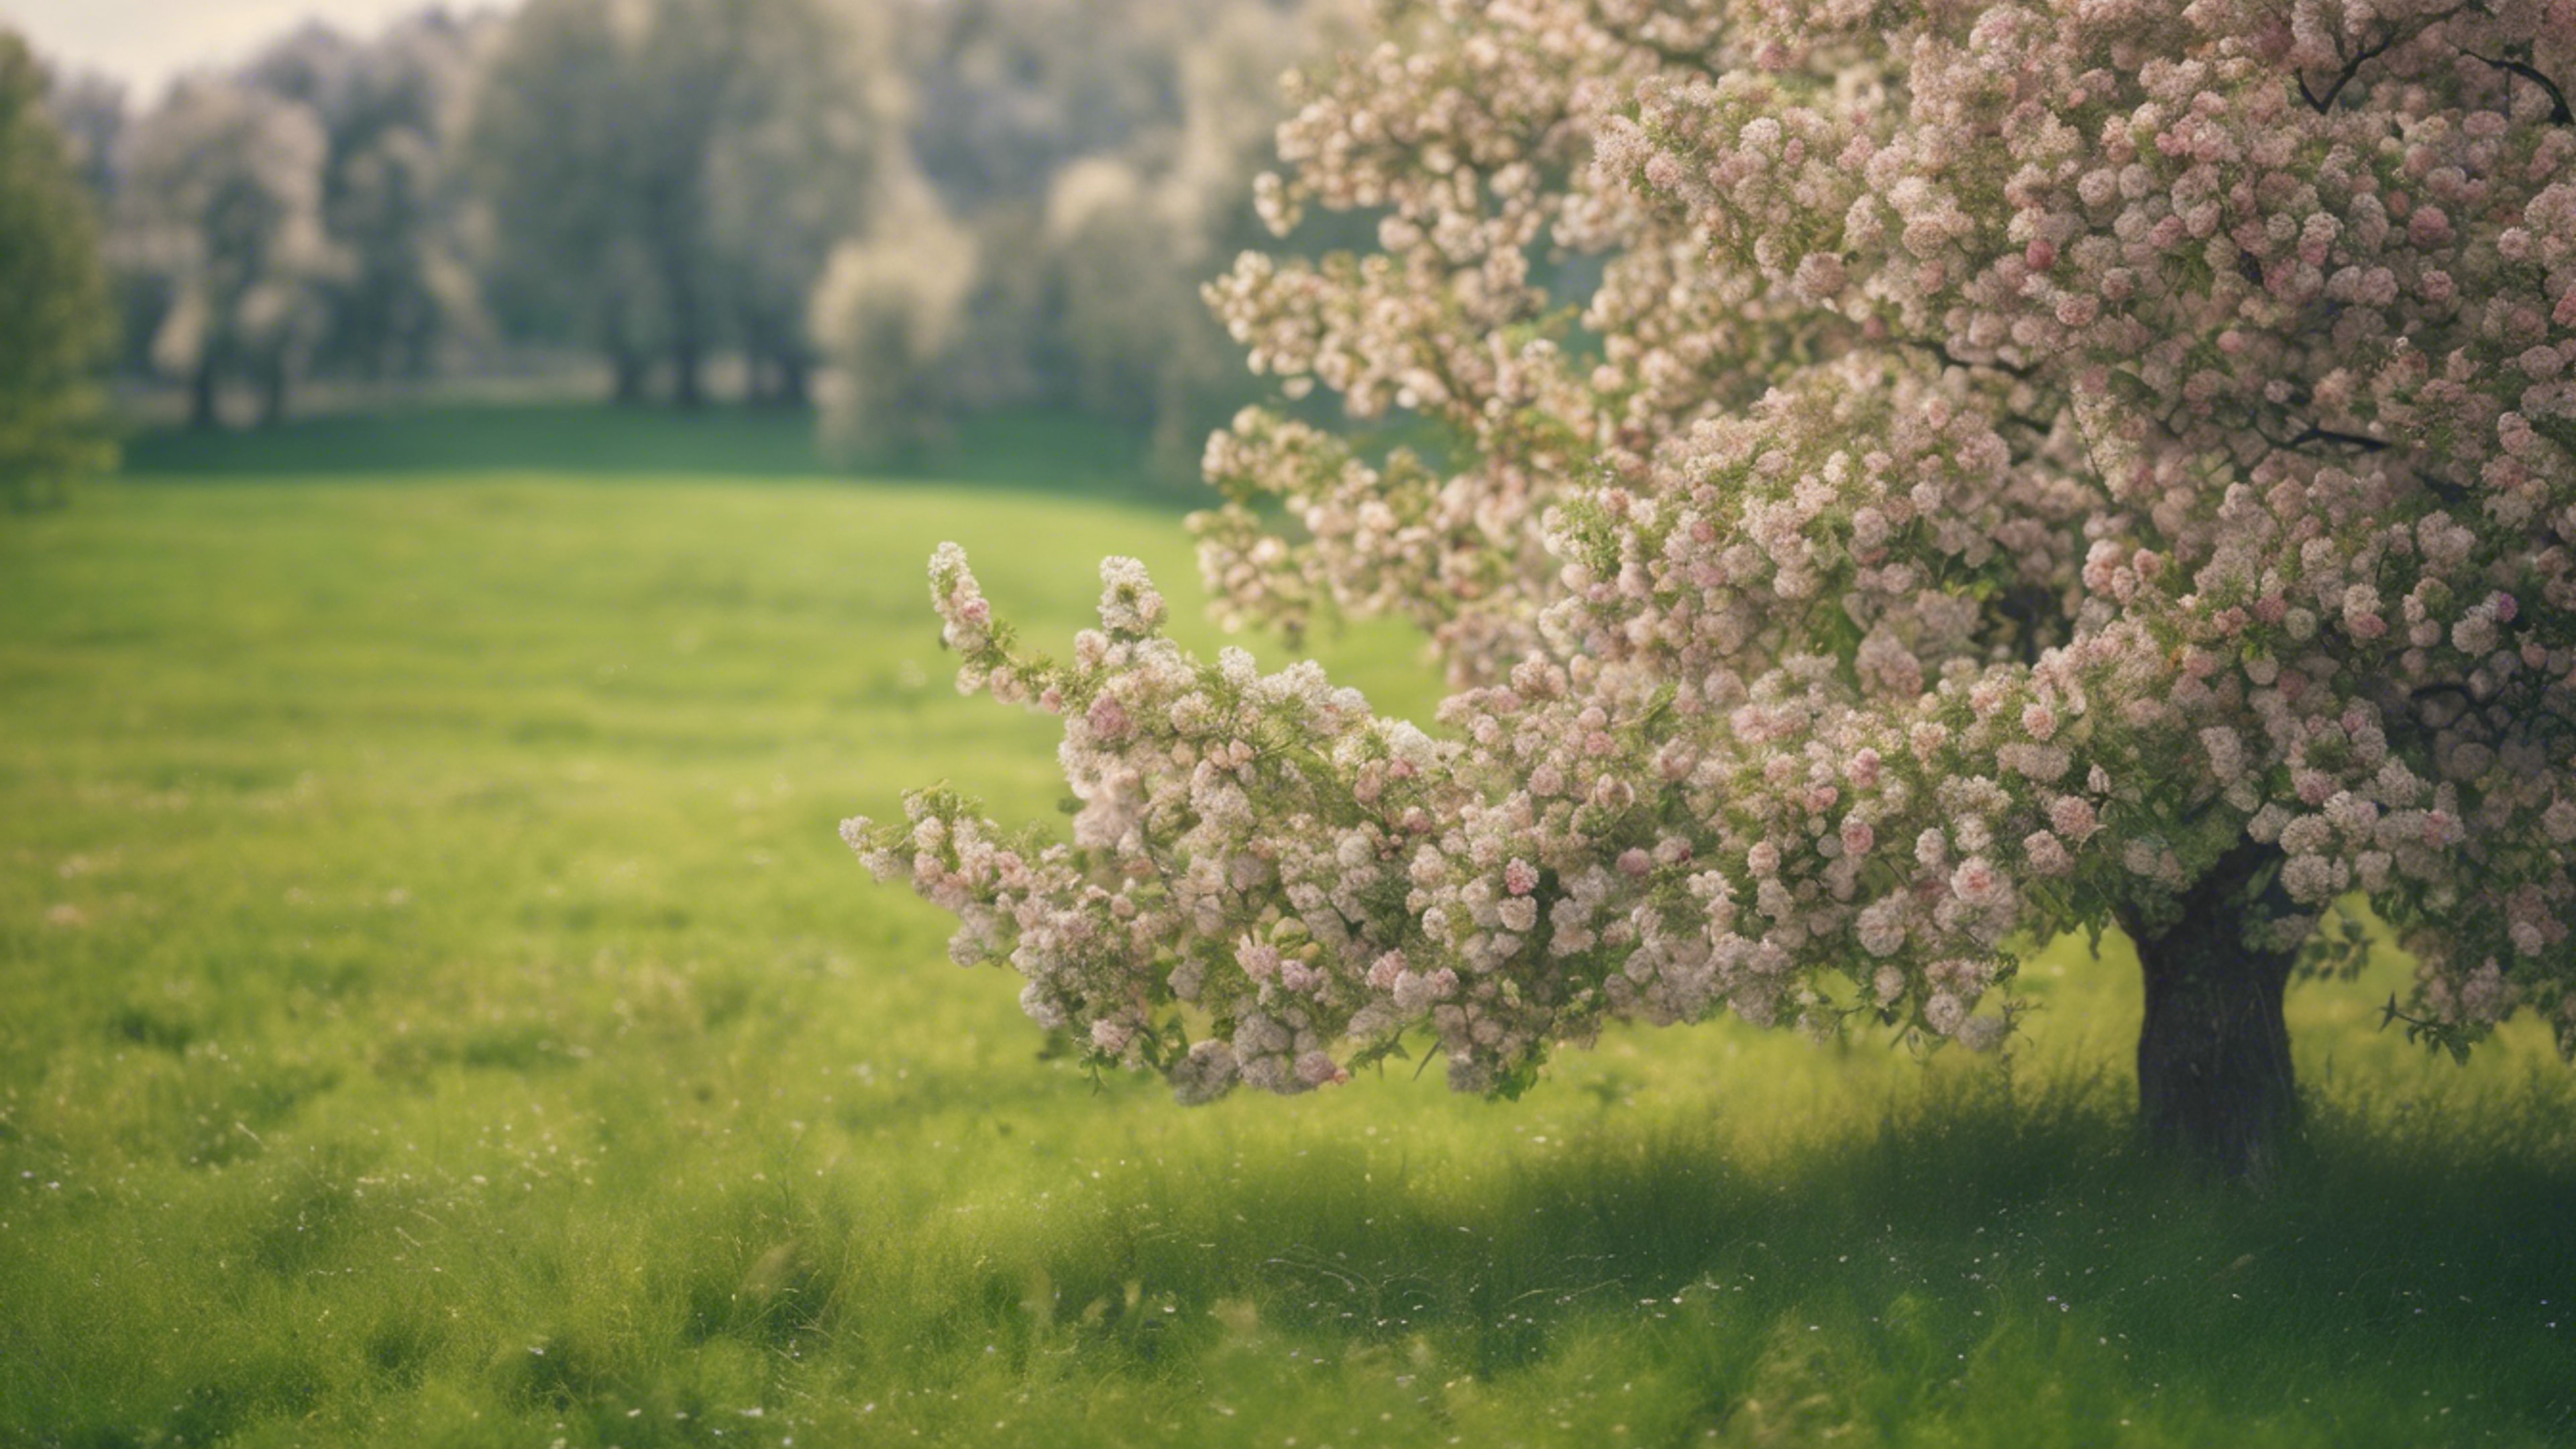 A flowering apple tree standing alone in a green, soft-focused meadow. Tapeta[1ff1aa7d7c75473a9031]